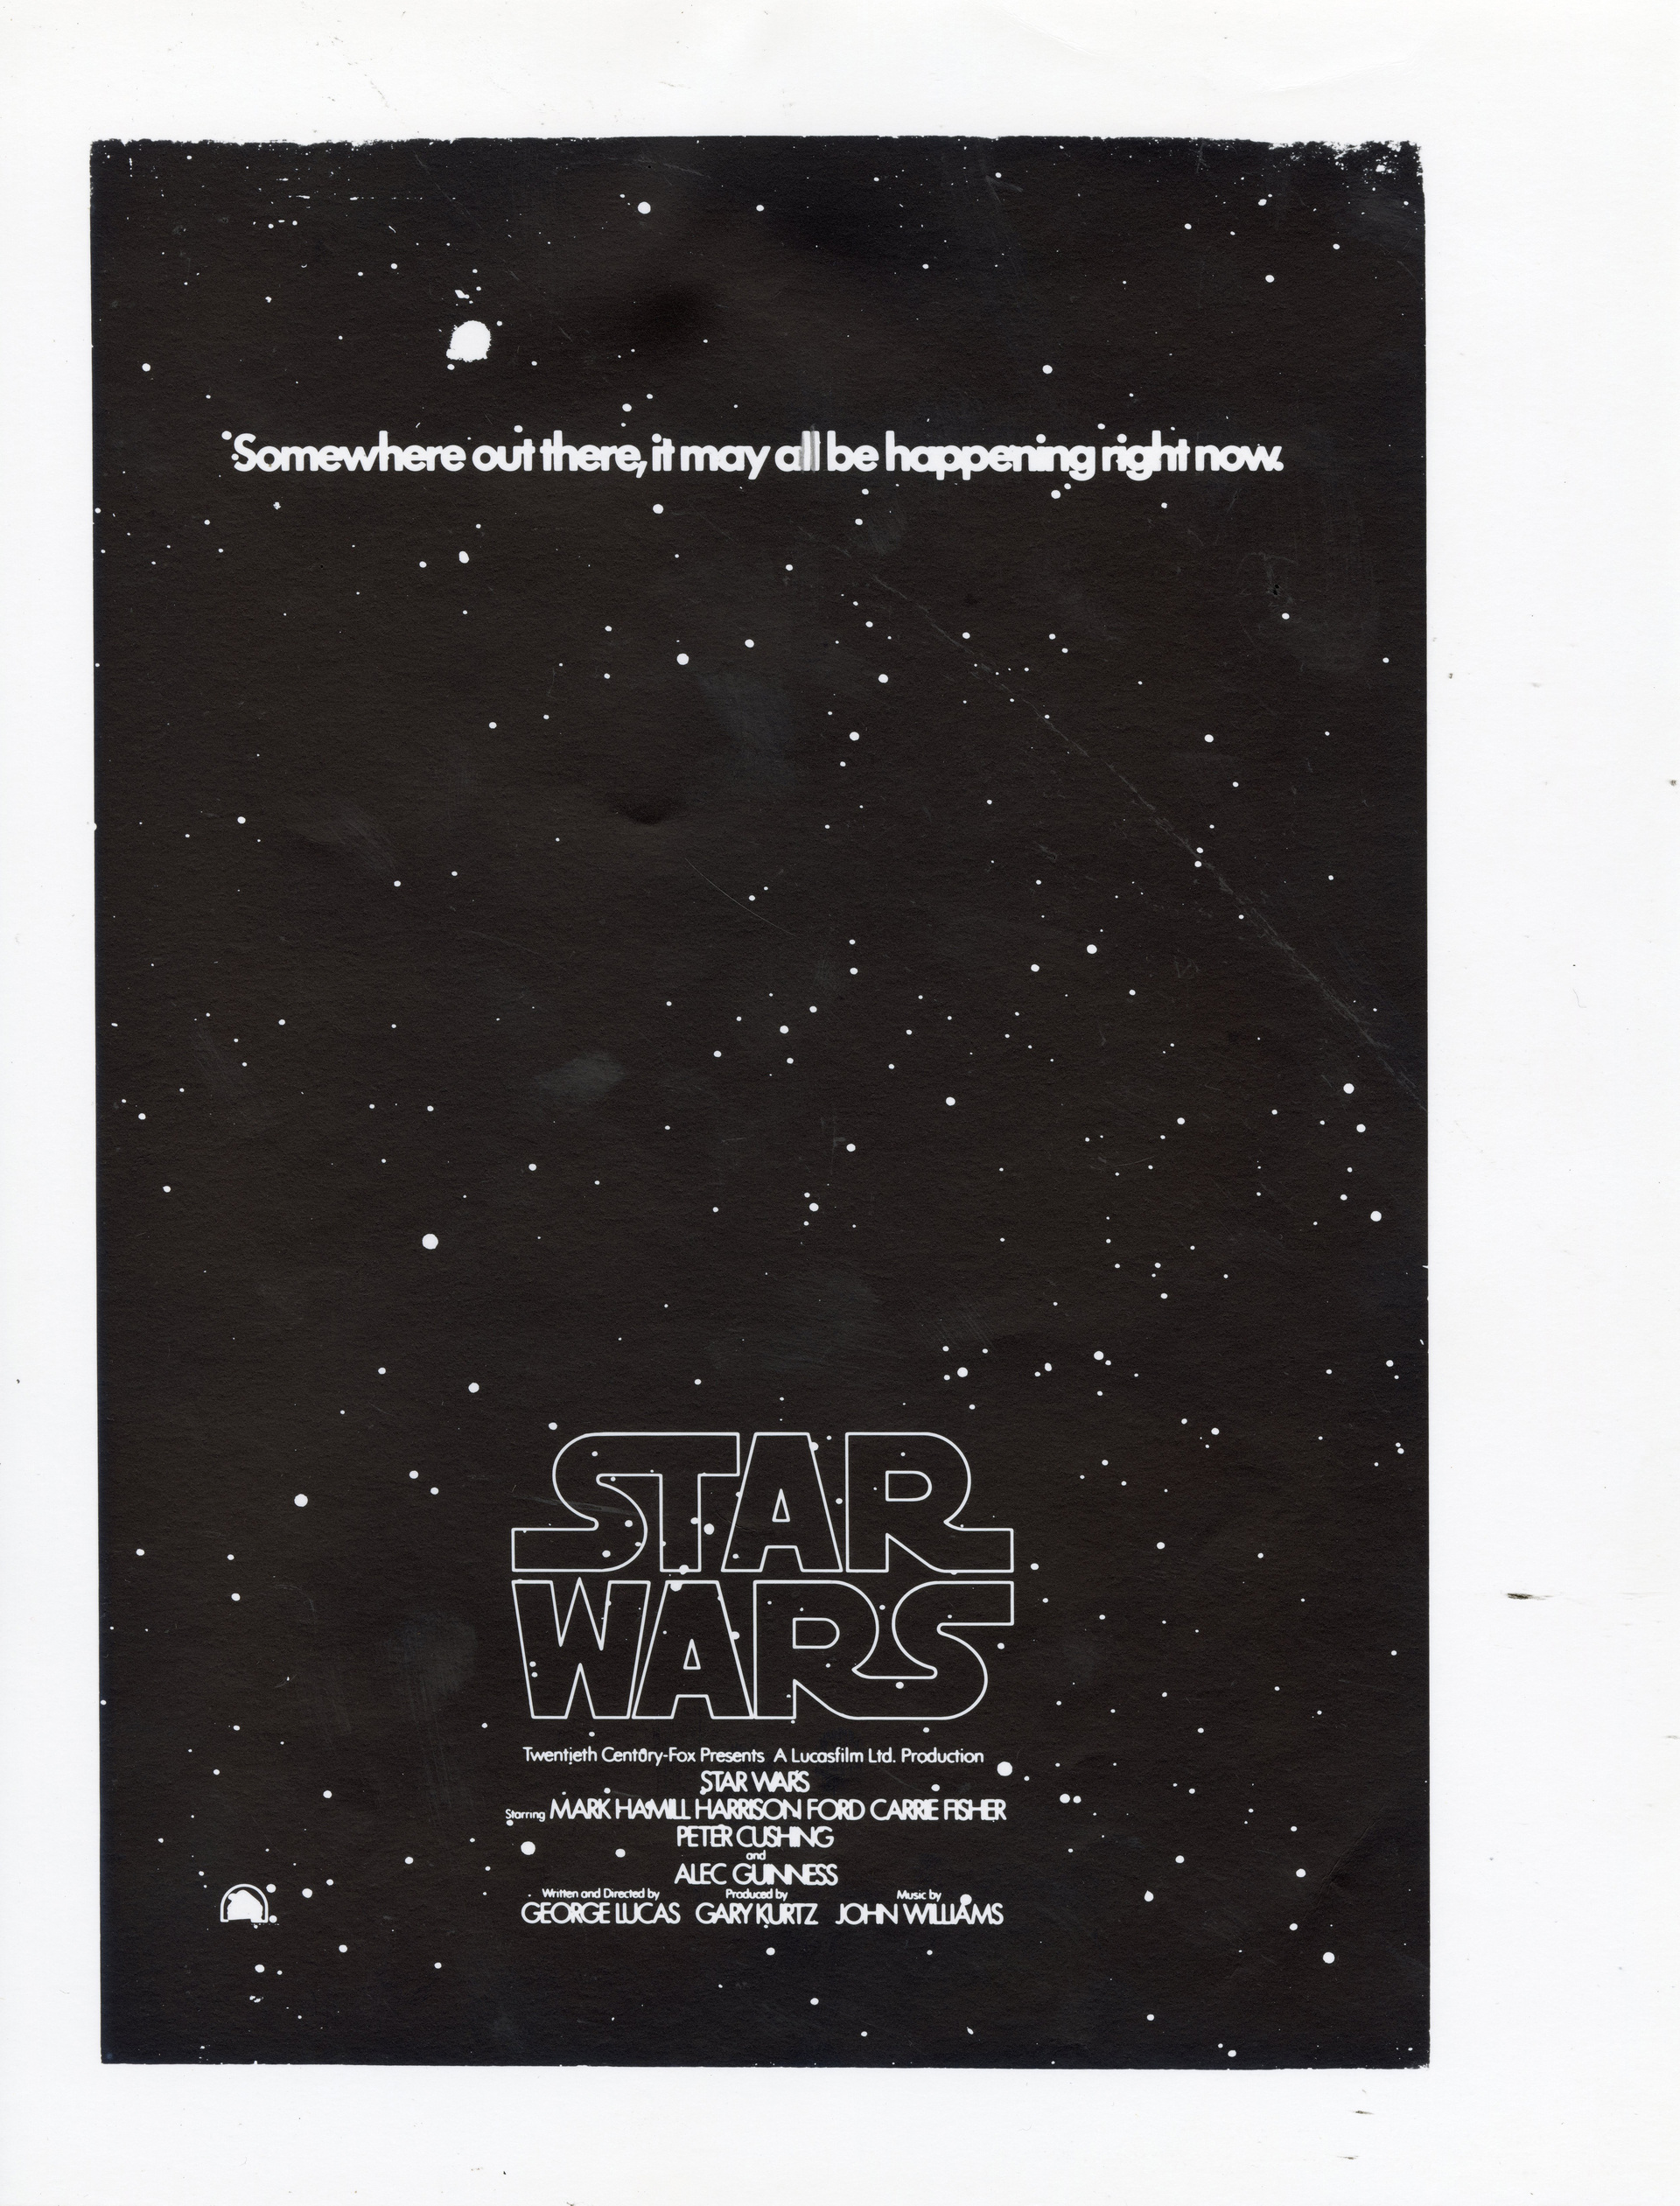 STAR WARS: A NEW HOPE (1977) - Charles Lippincott Collection: Set of 17 Poster Concept Prints - Image 7 of 19